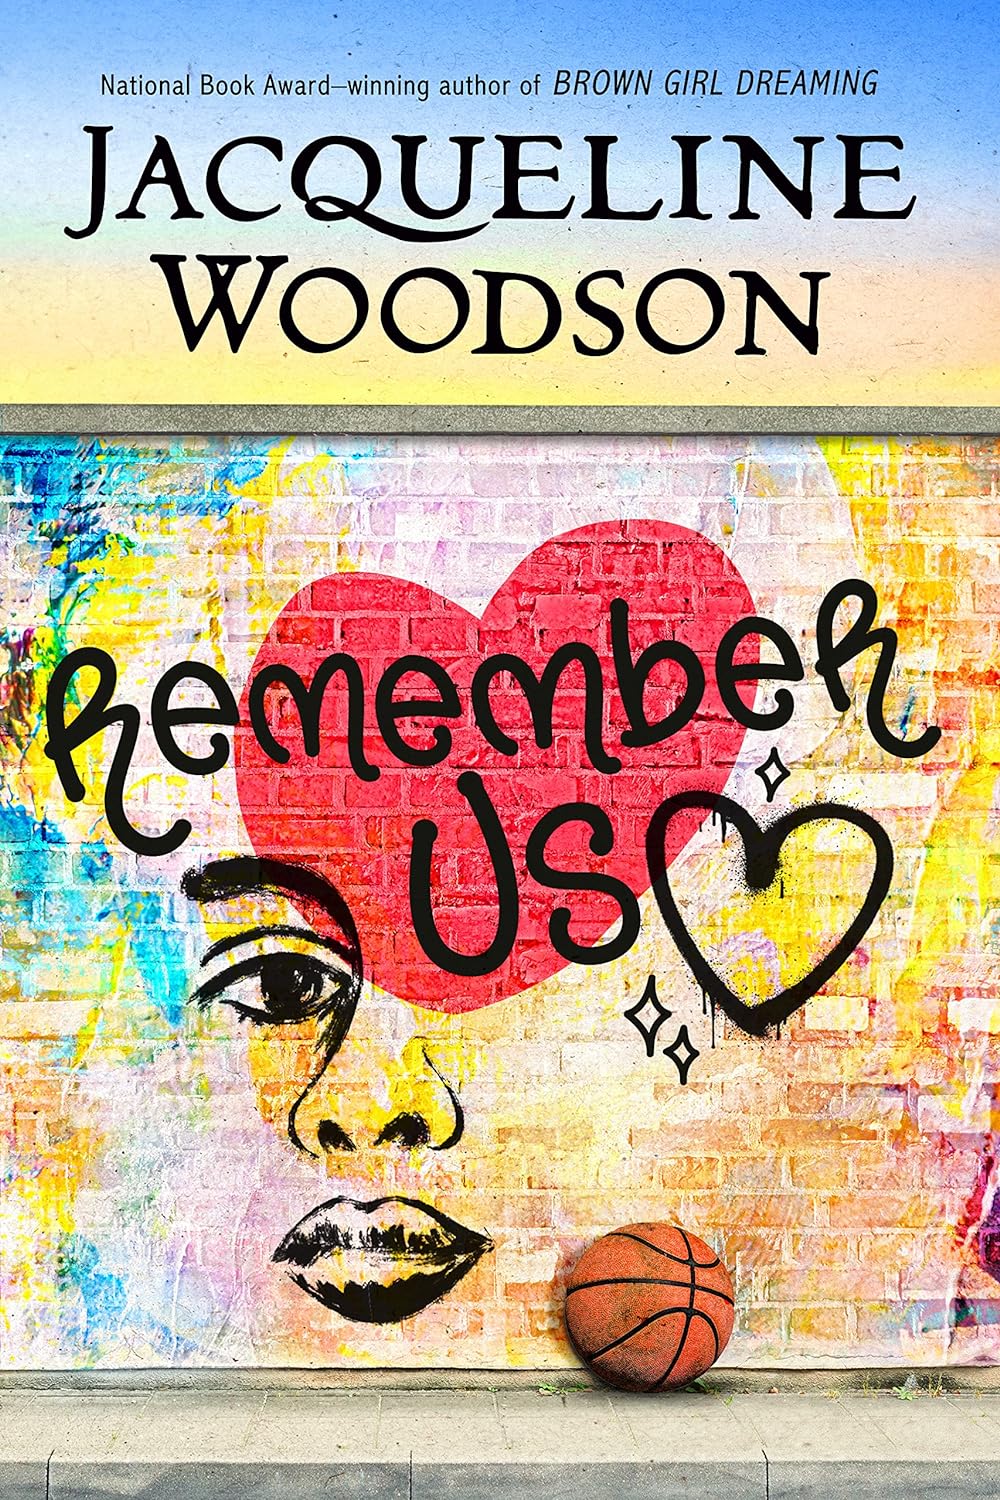 One of our recommended books is Remember Us by Jacqueline Woodson